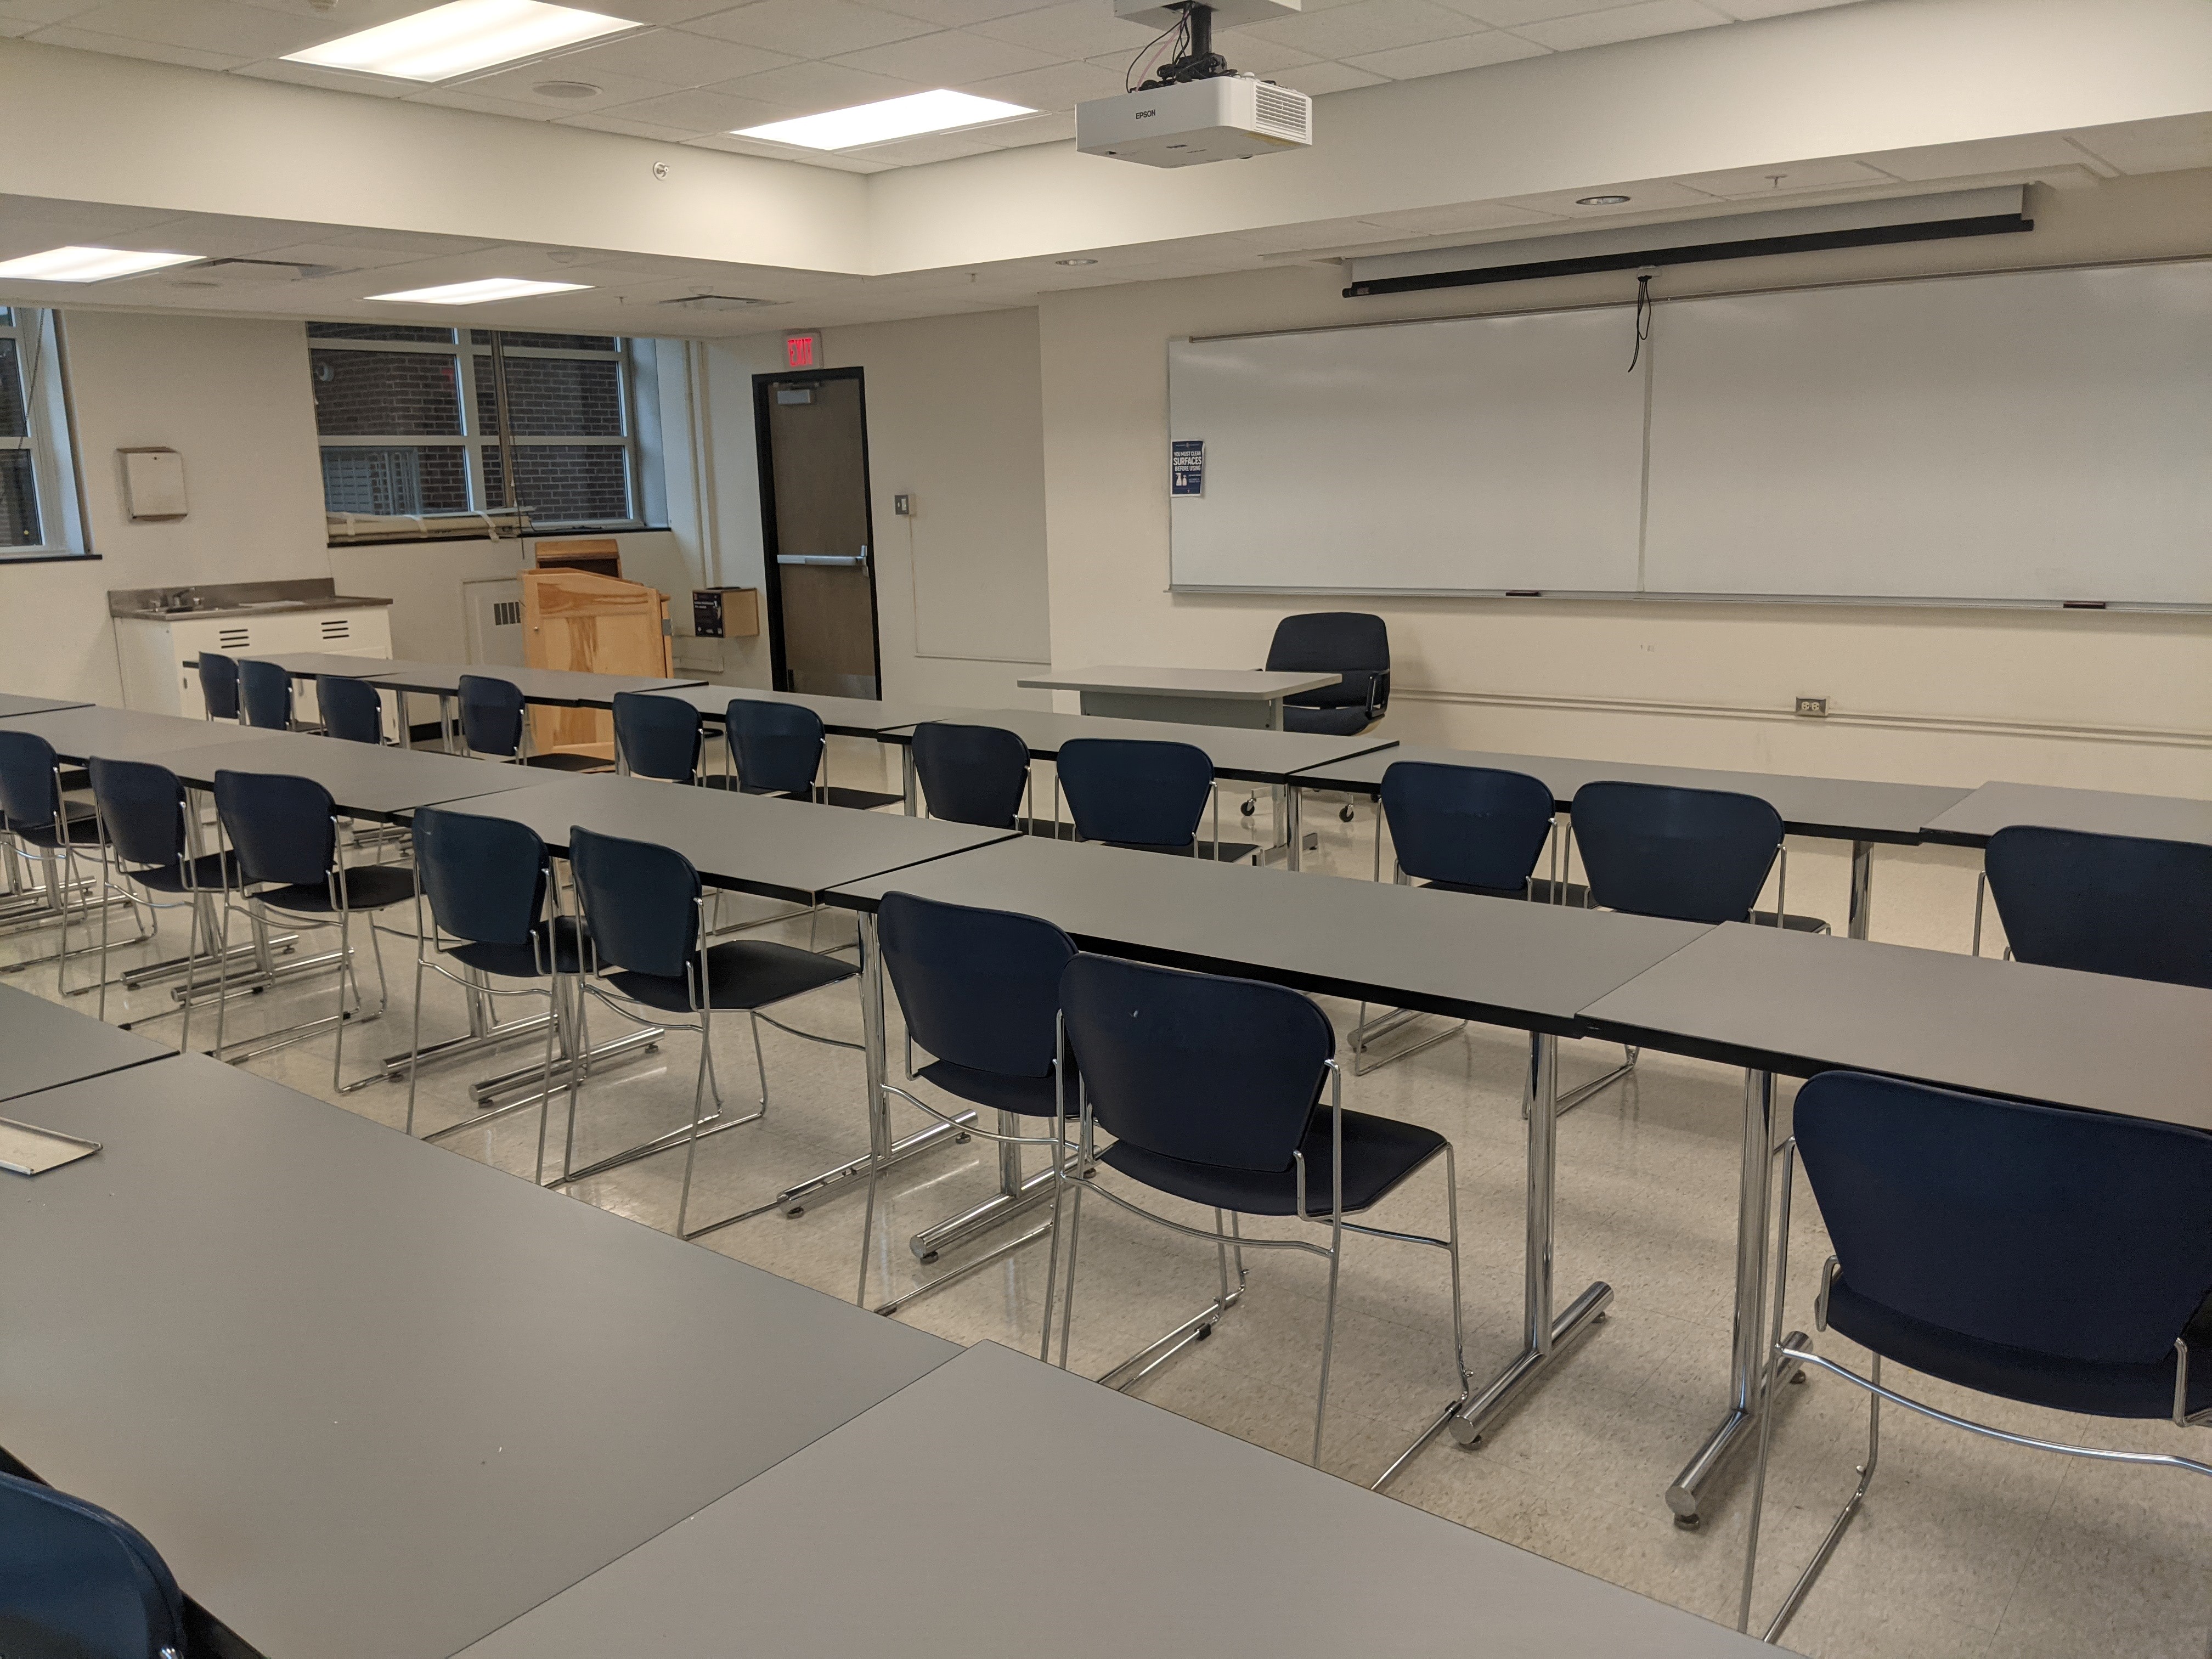 A view of the classroom with movable tables and chairs, whiteboard, and instructor table in front.